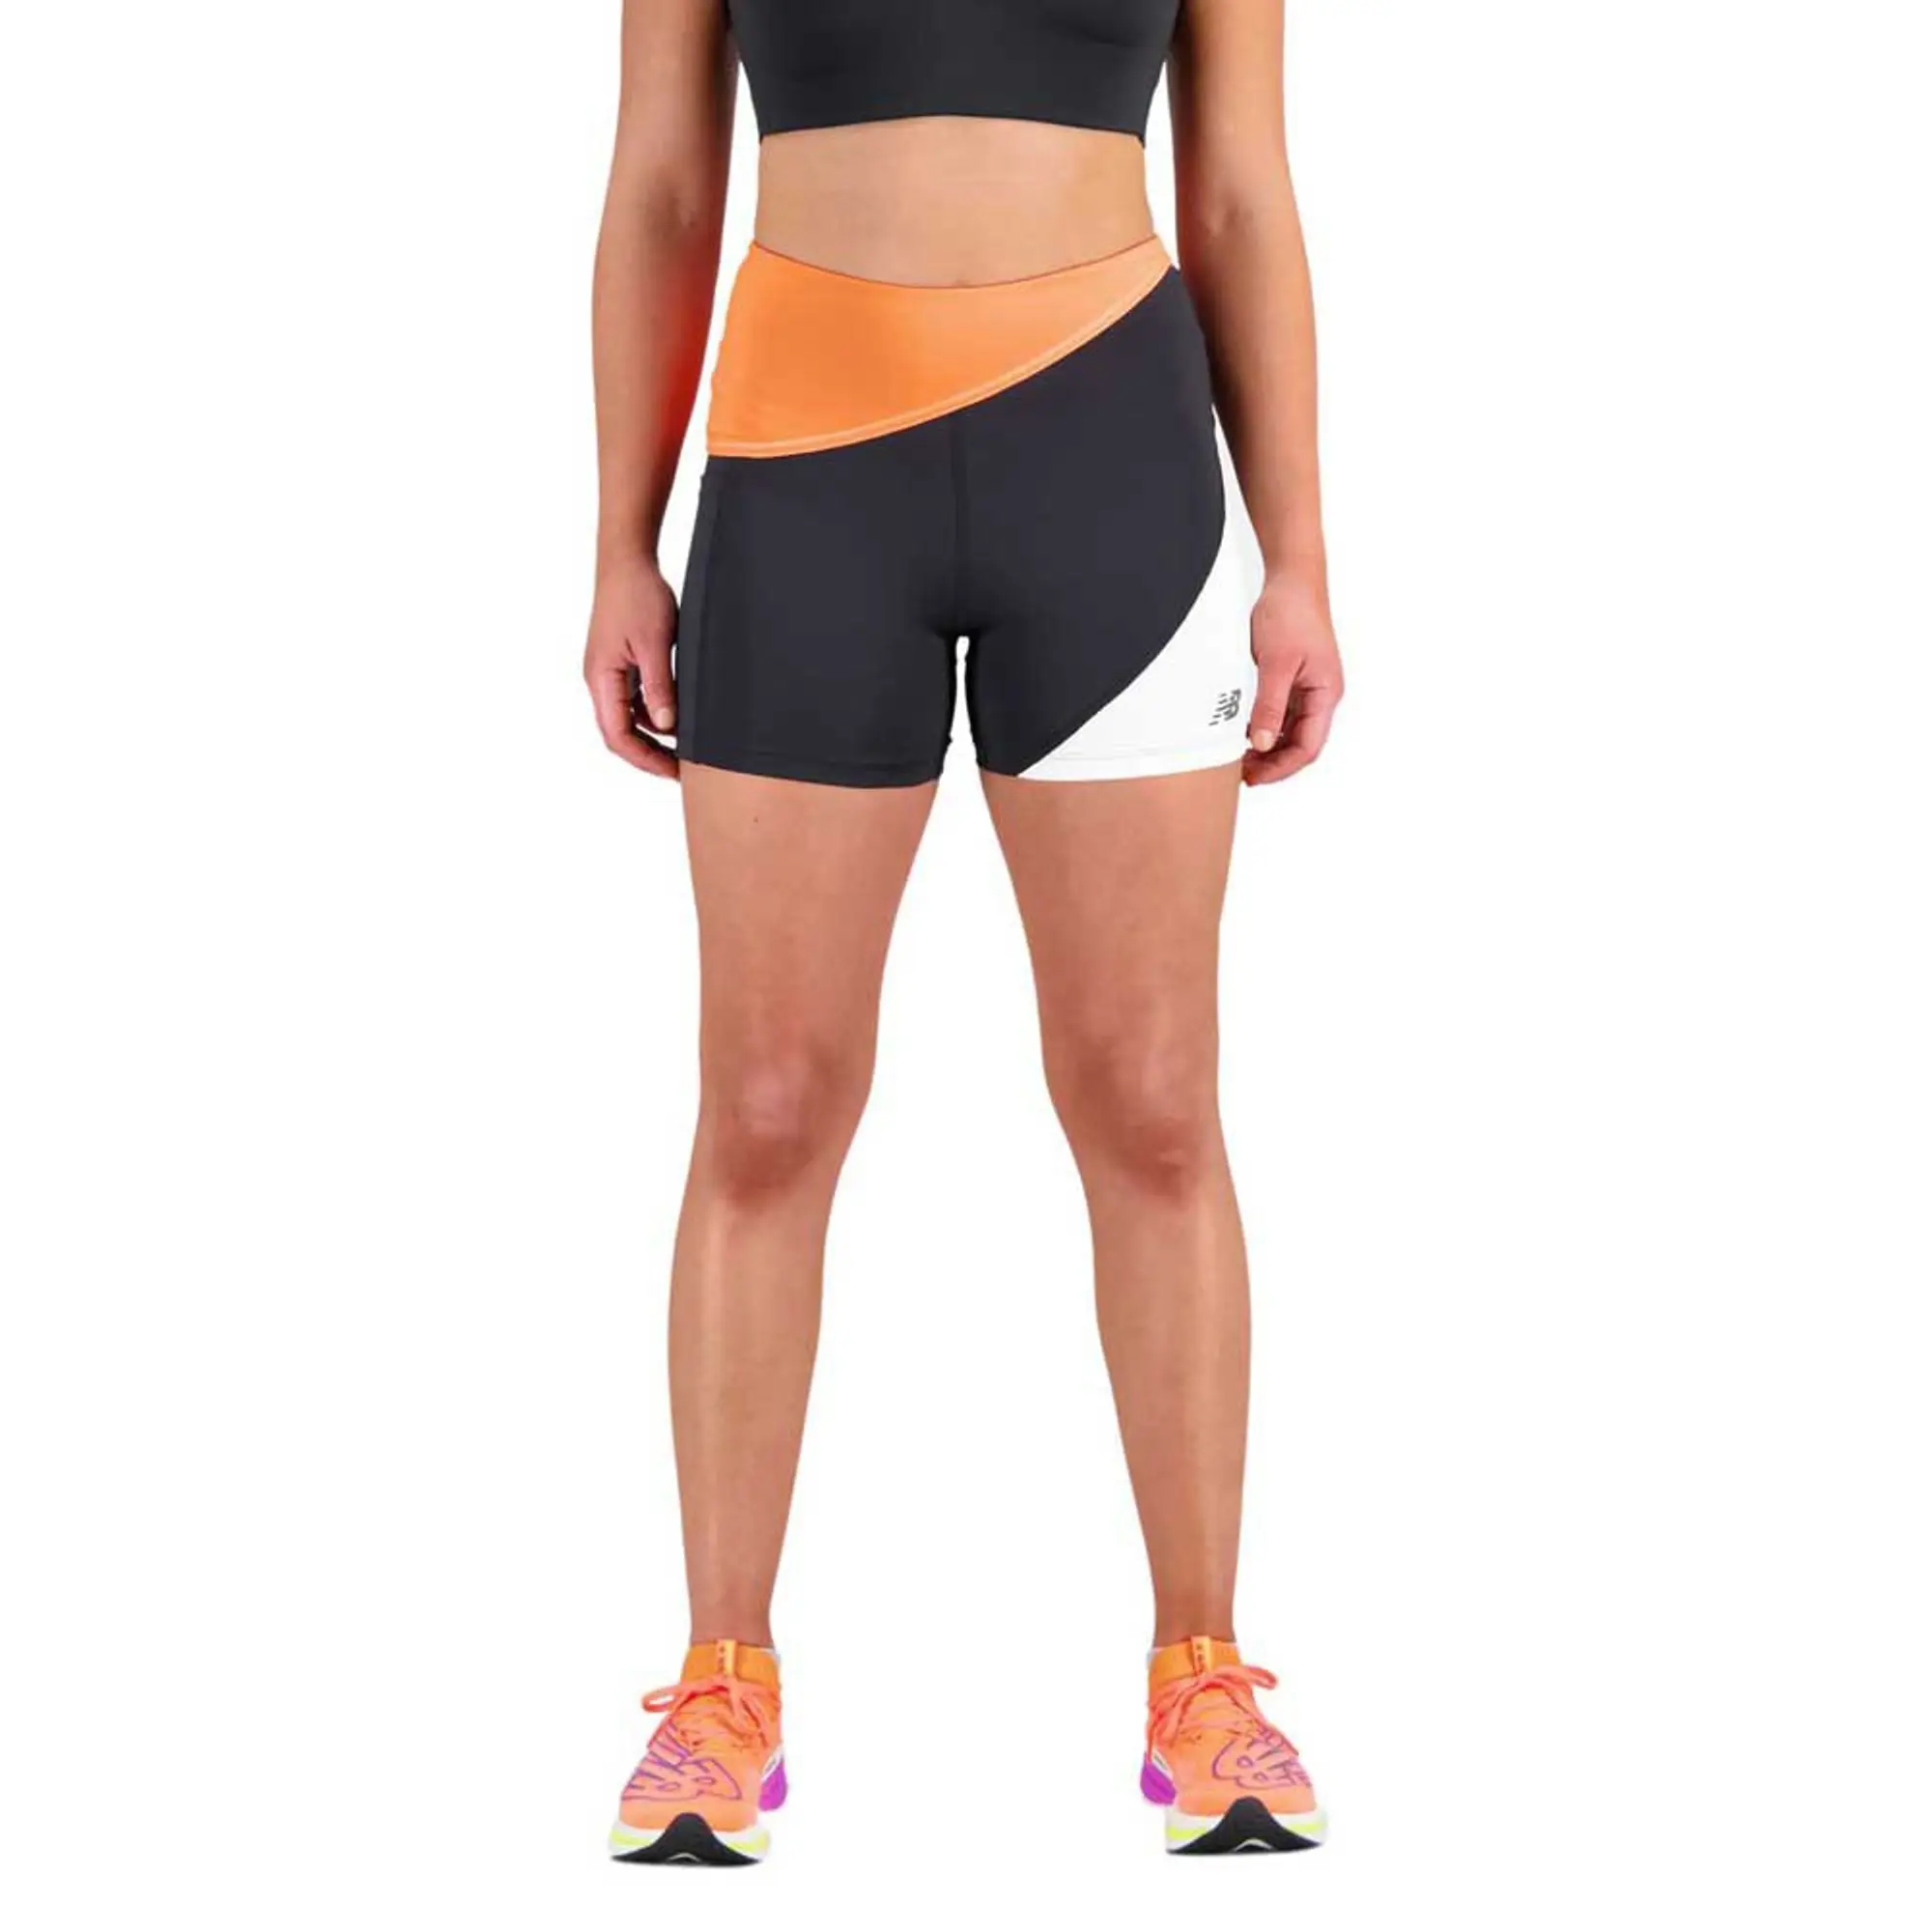 New Balance Women's Q Speed Shape Shield 4 Inch Fitted Short in Orange Polywoven